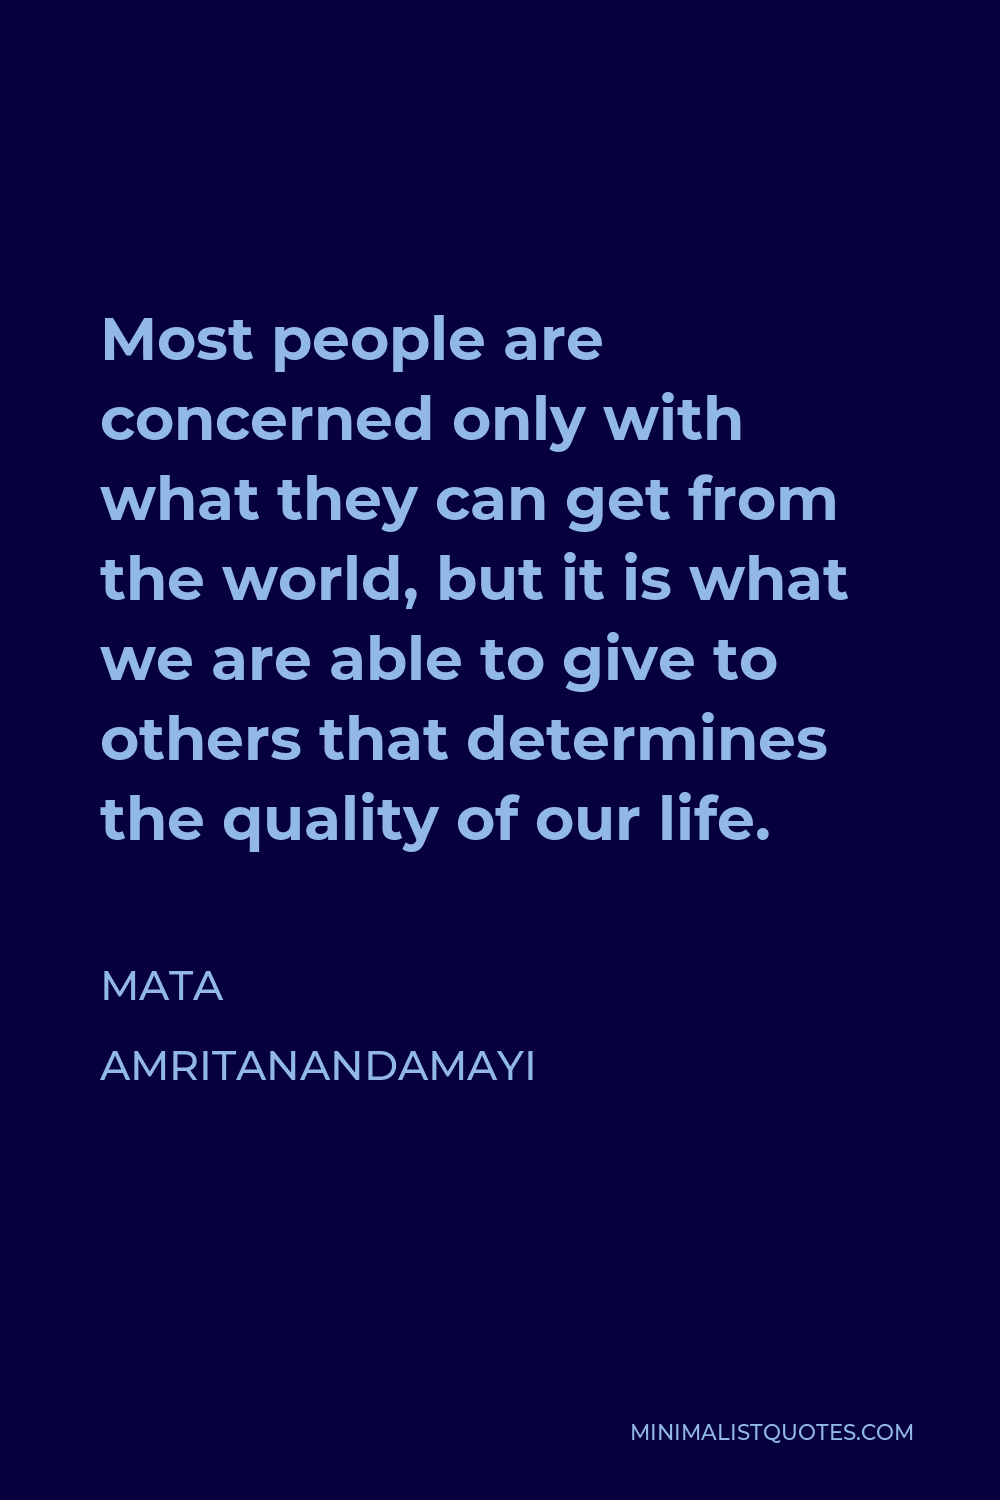 Mata Amritanandamayi Quote - Most people are concerned only with what they can get from the world, but it is what we are able to give to others that determines the quality of our life.